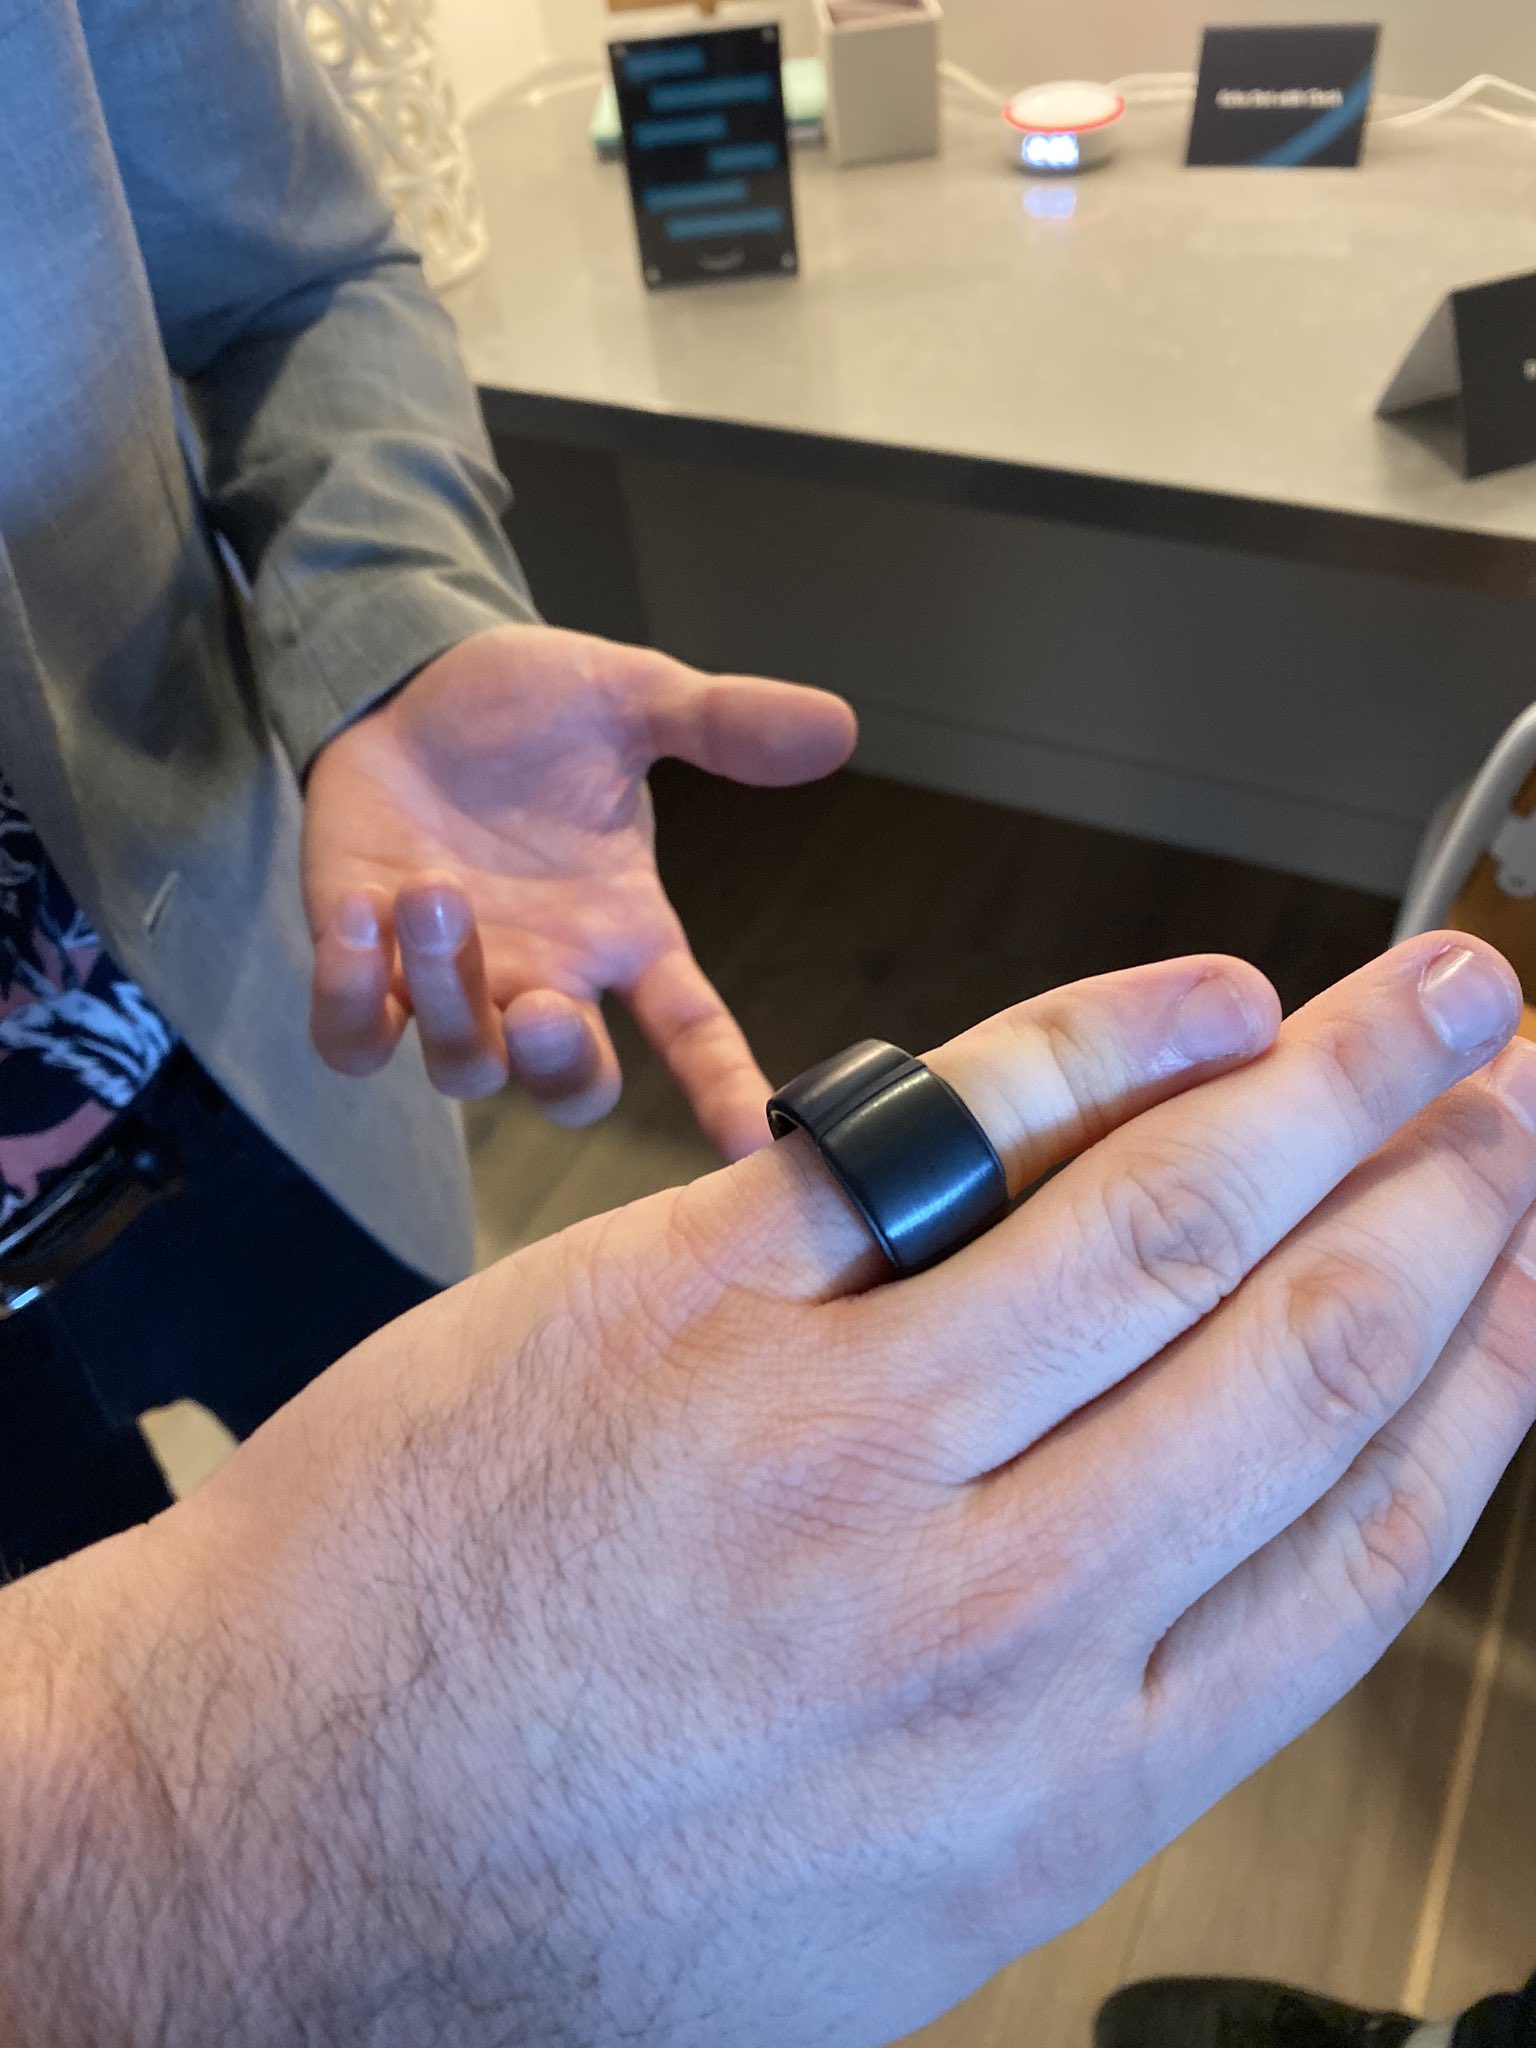 Mike Murphy on X: Here's me with the Echo Loop ring, which you